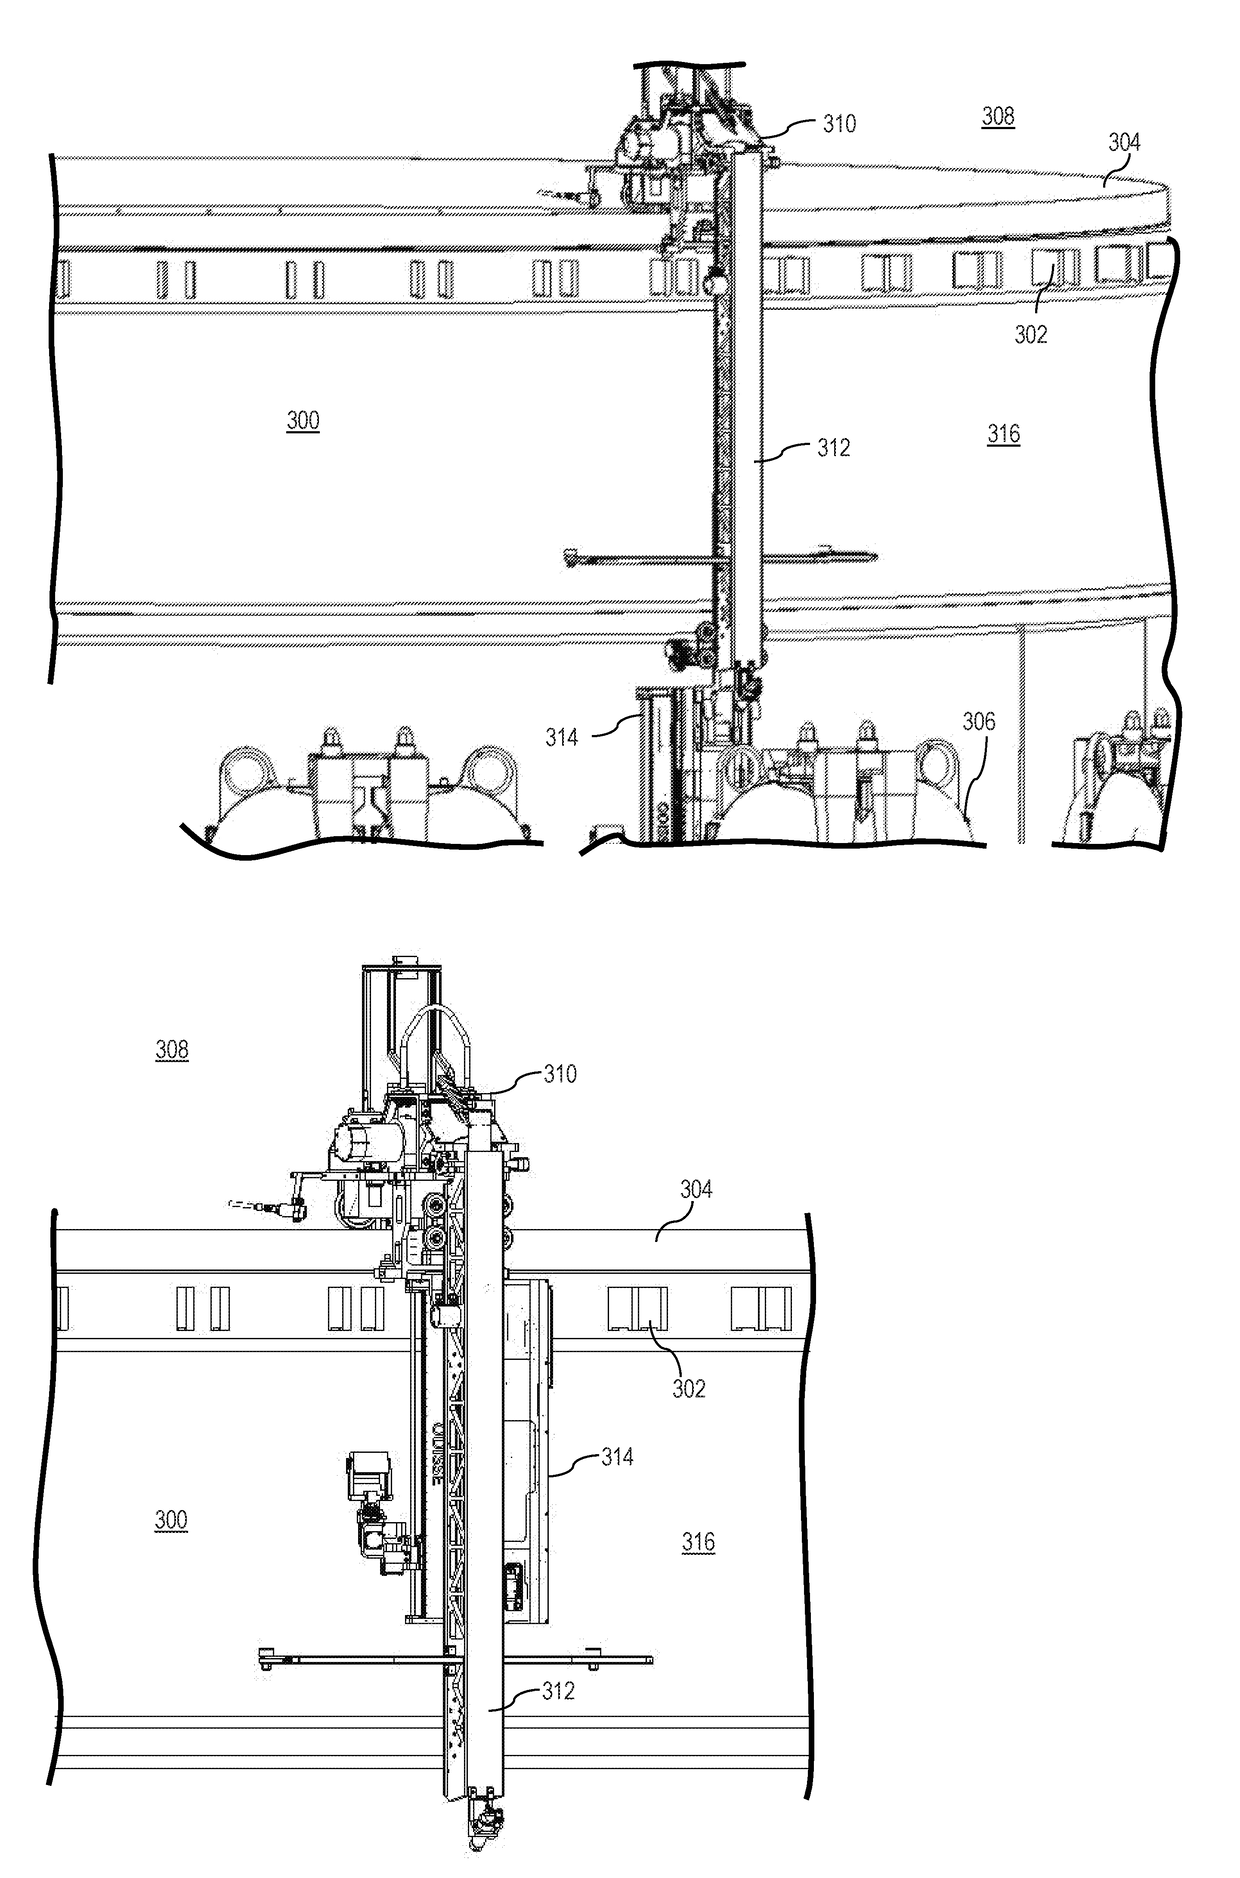 Remotely operated vehicles, systems, and methods for inspecting core shrouds